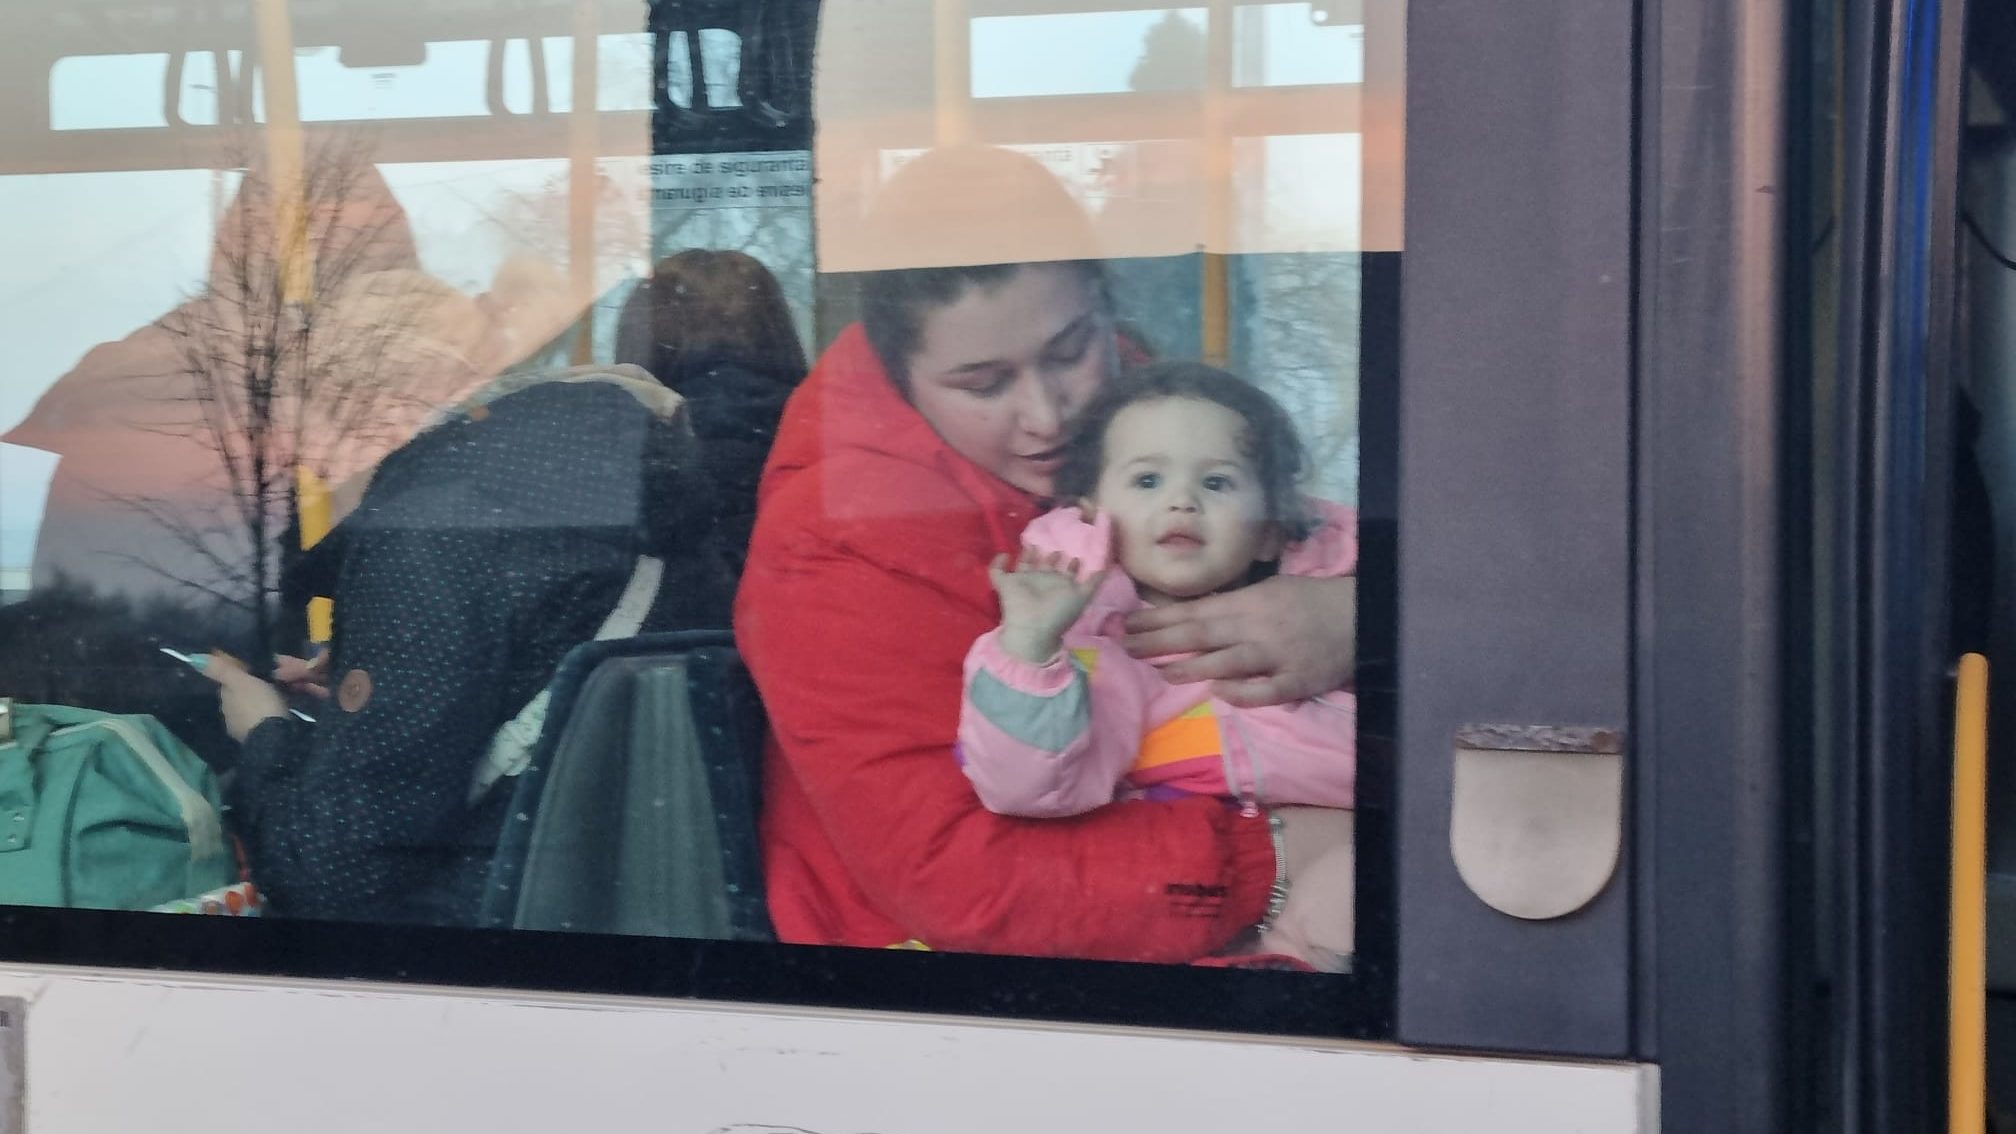 Ukrainian Refugees Arriving in Romania Say They Will Return Home After the War (with VIDEO)